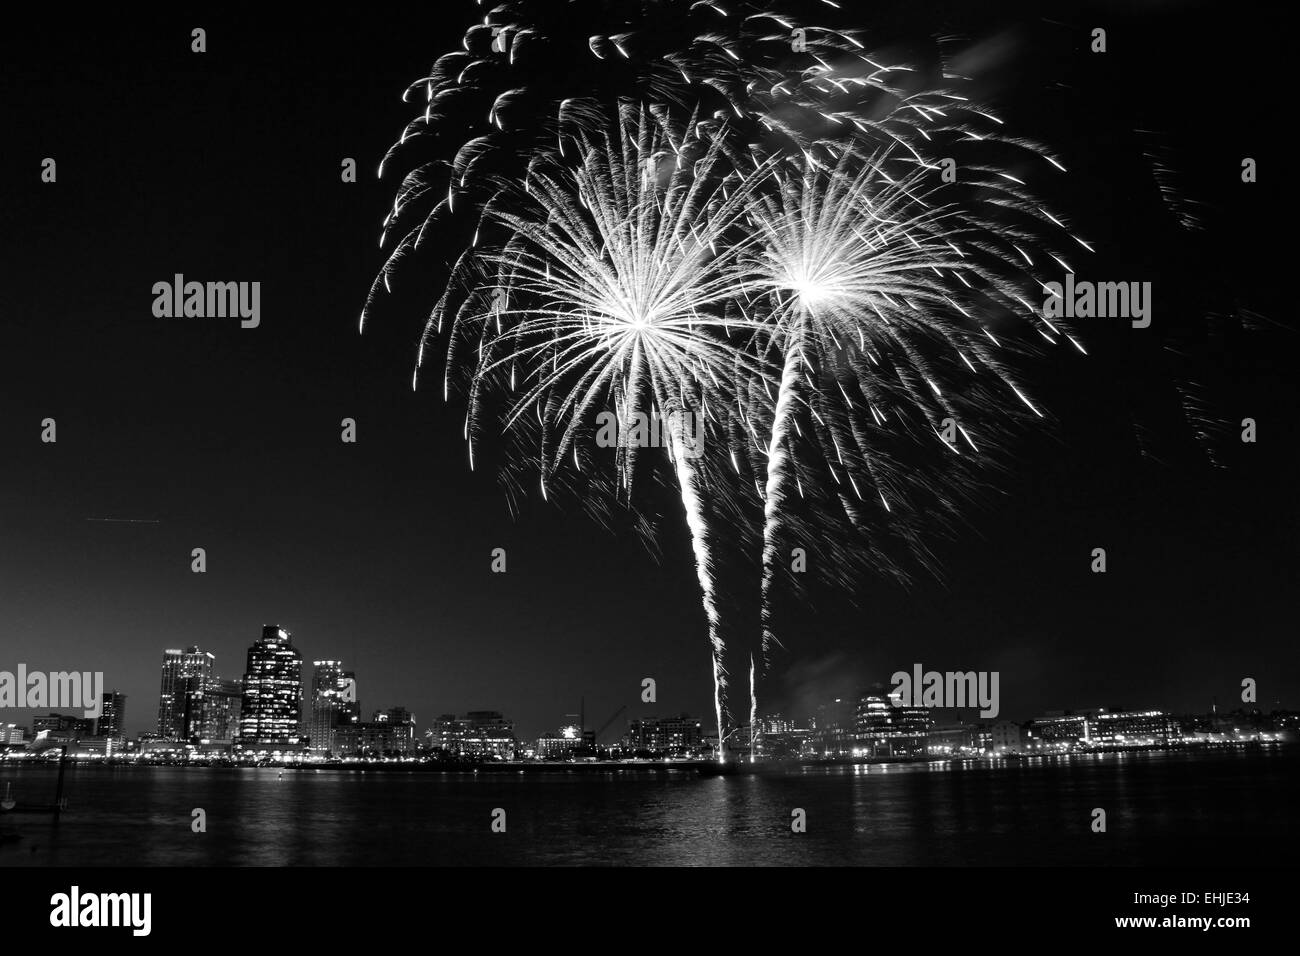 Fireworks during the 4th of July over Baltimore, Maryland Stock Photo